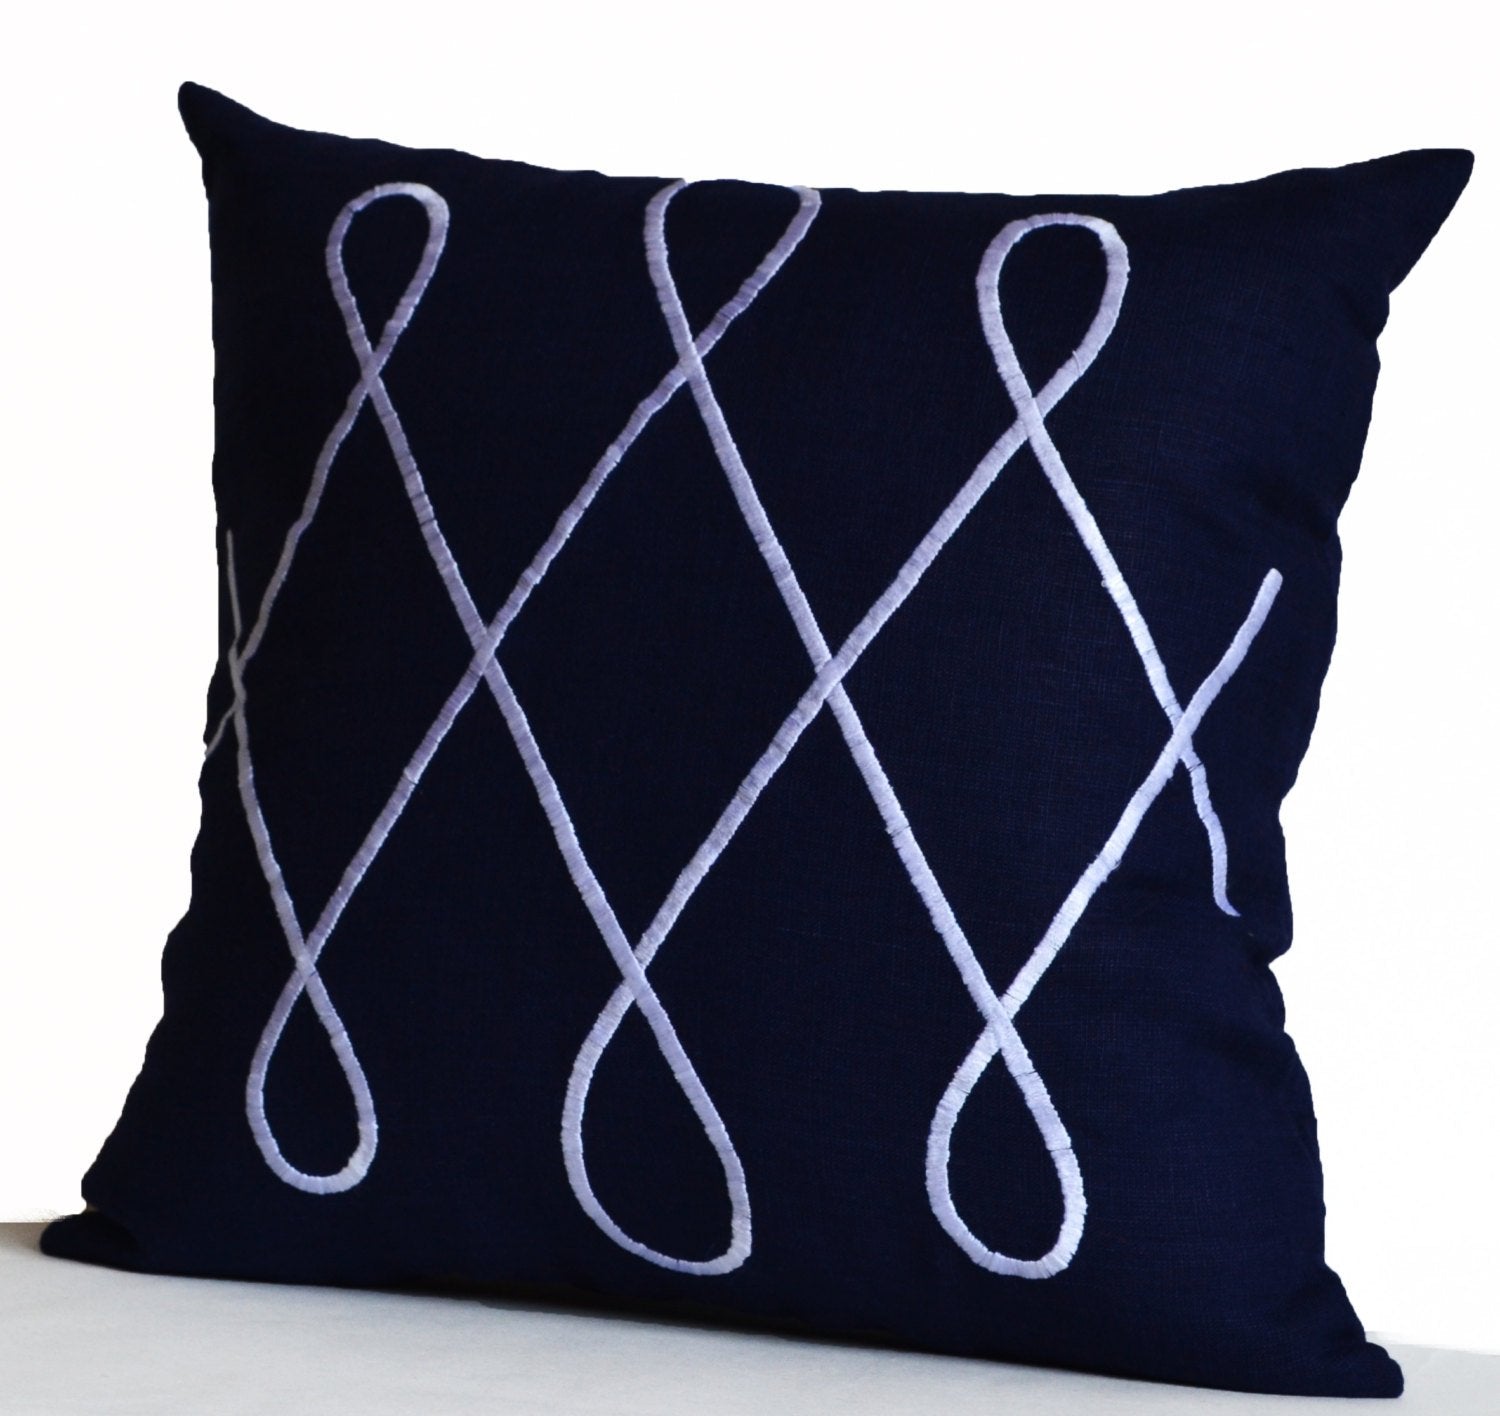 Amore Beaute Blue Throw Pillow Covers, Navy Blue Pillow Cover, Embroidered Pillow Cover